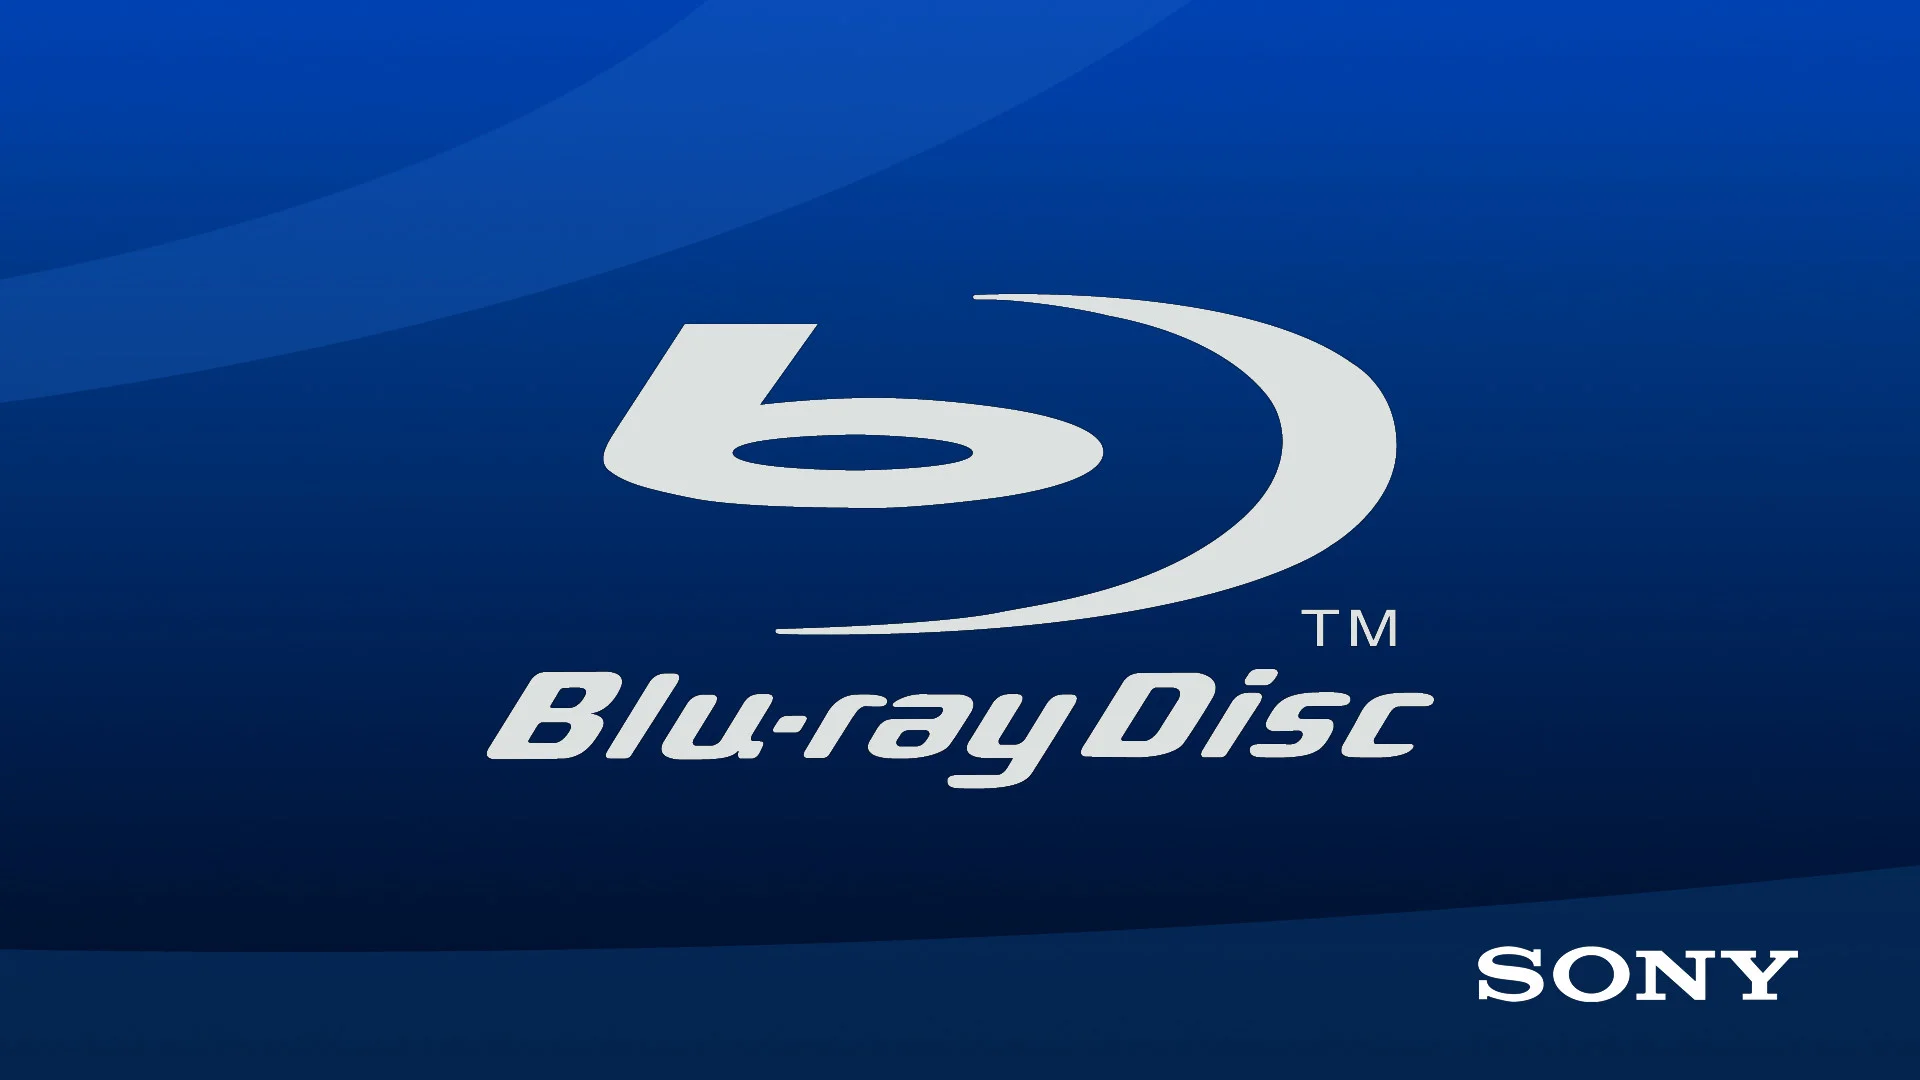 Bluray Disc wallpapers 62 Wallpapers